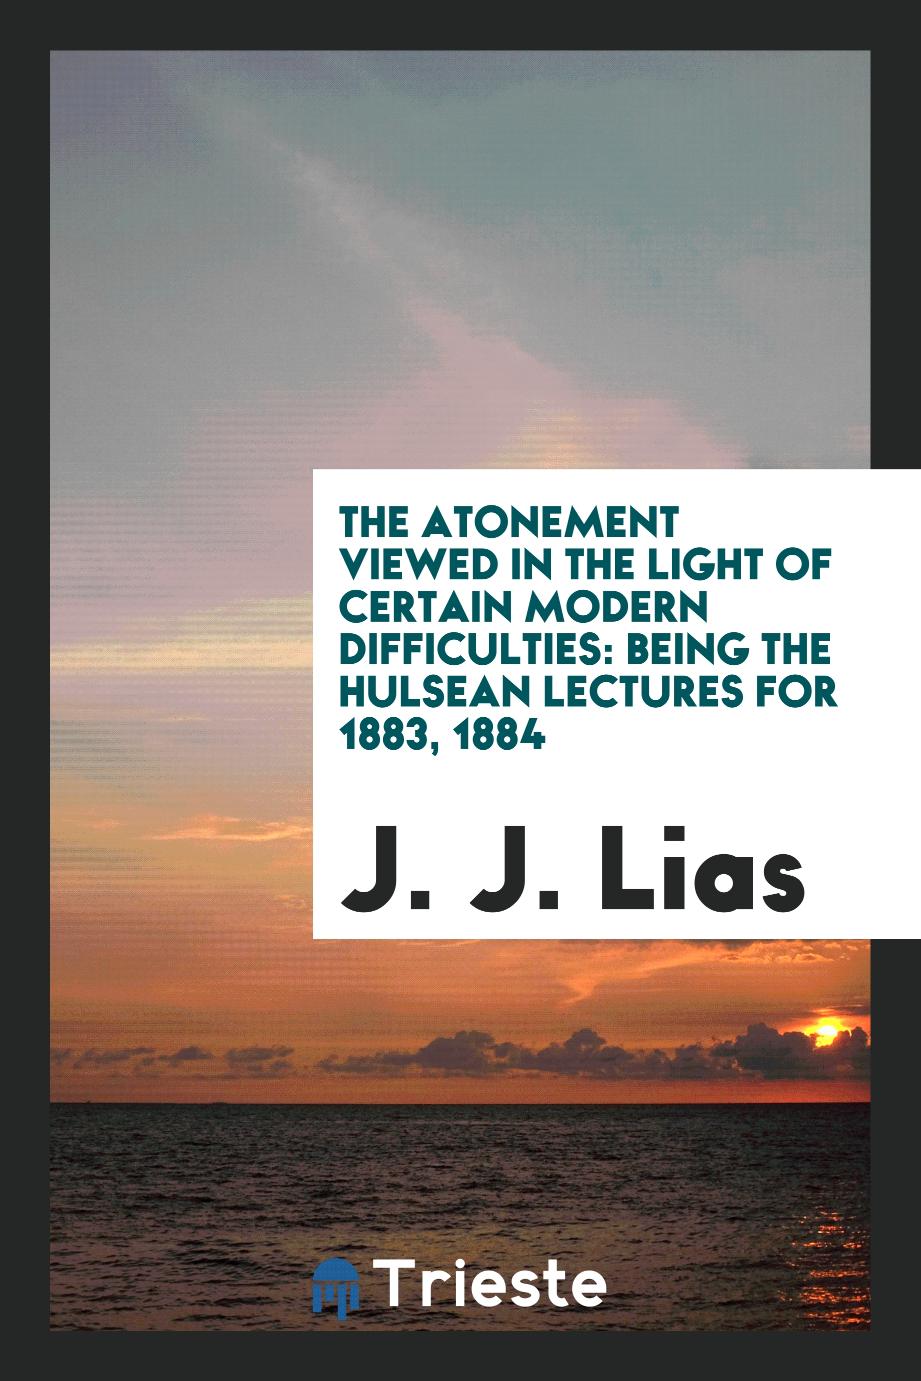 The Atonement viewed in the light of certain modern difficulties: being the Hulsean lectures for 1883, 1884